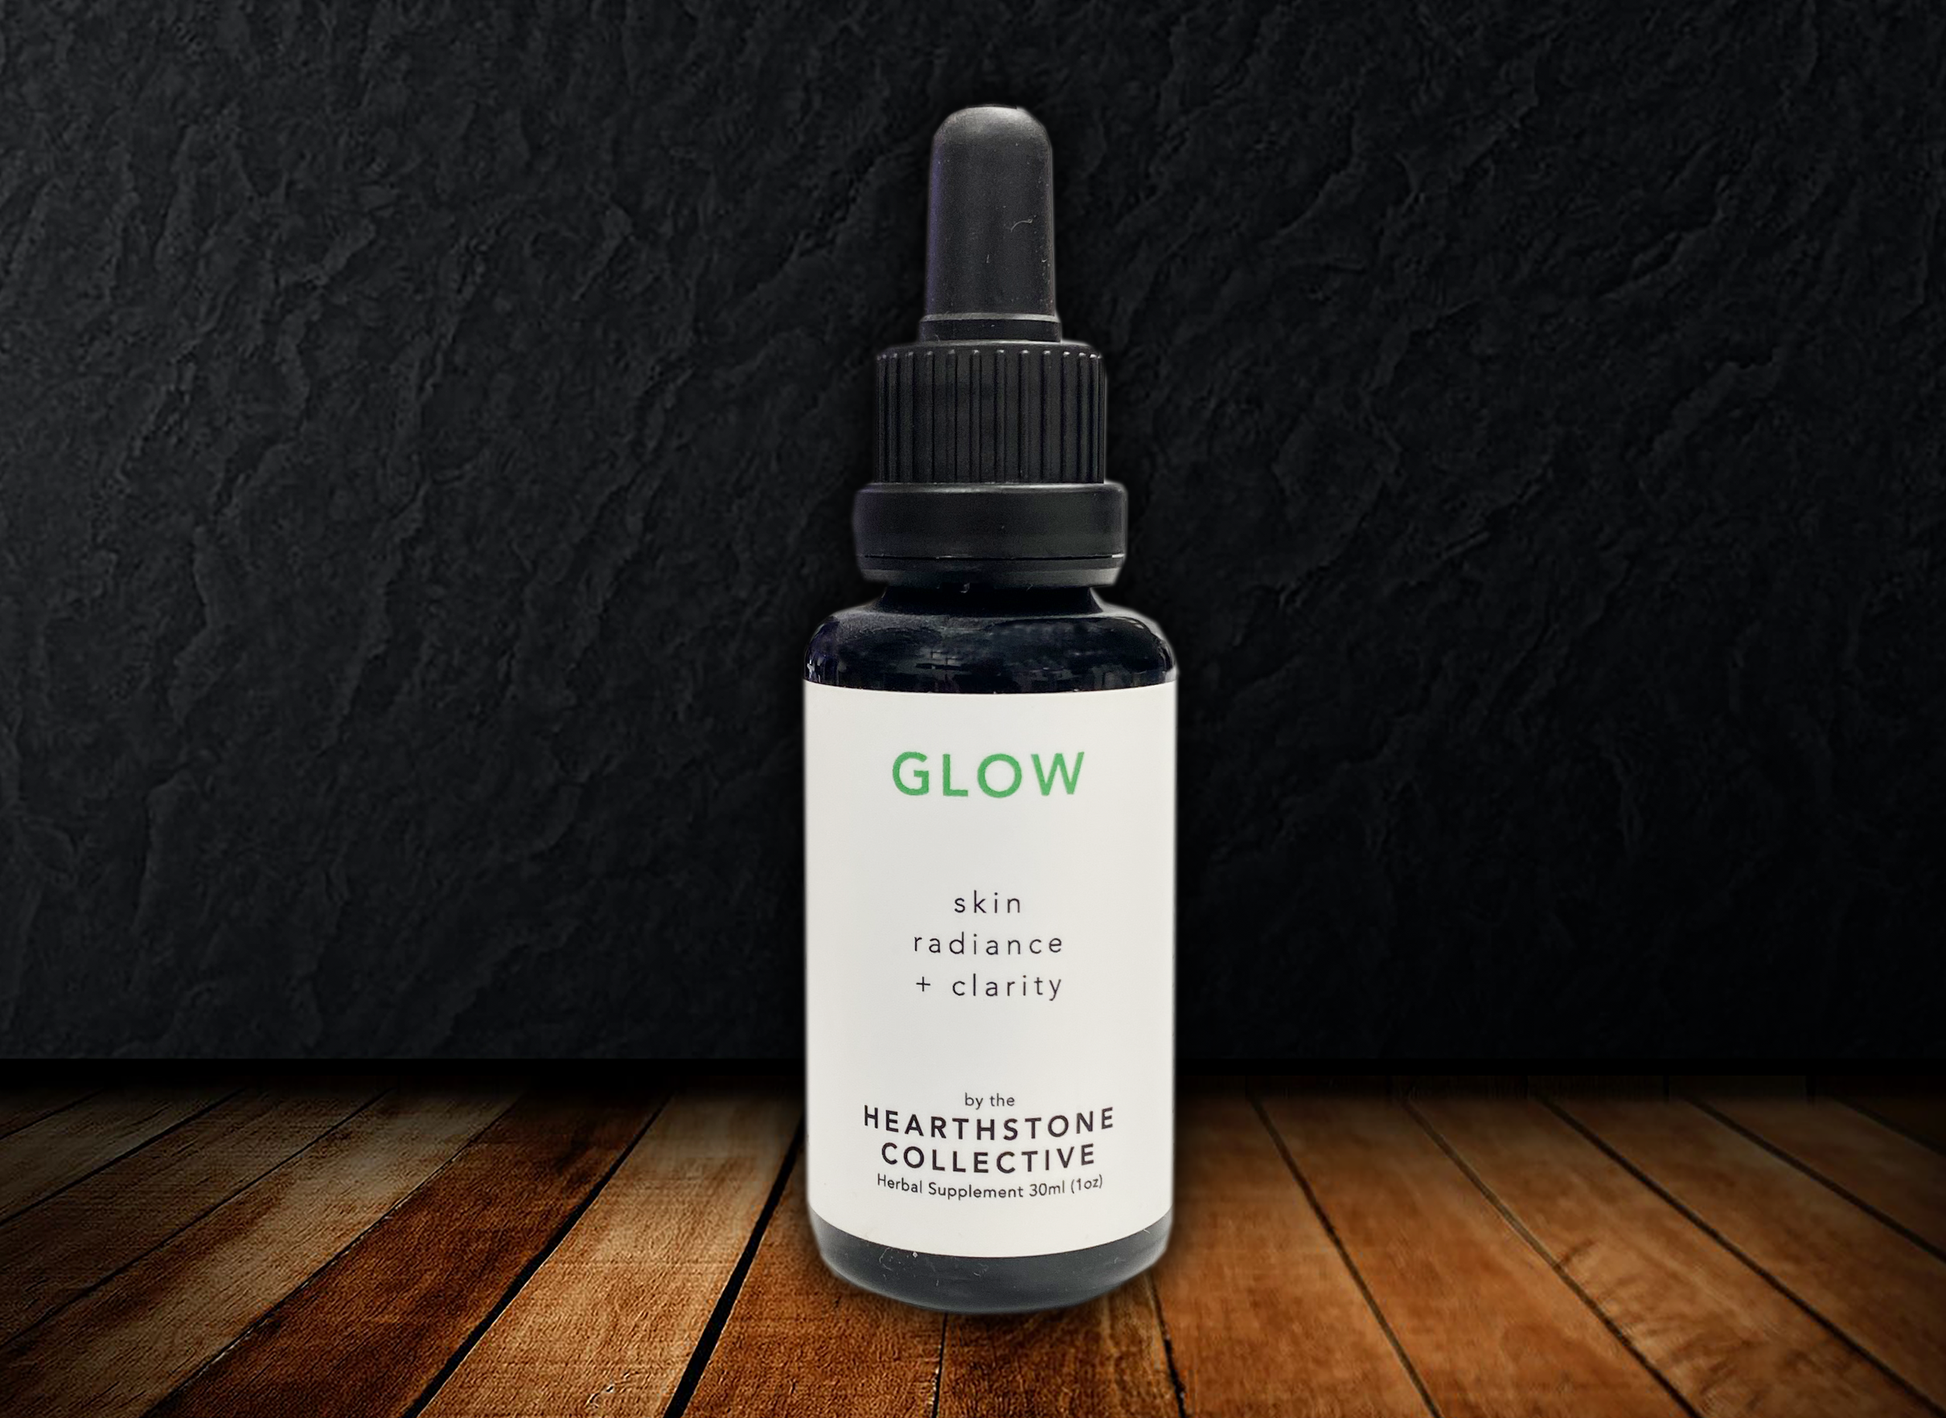 Glow Skin Radiance + Clarity by Hearthstone Collective by CULTUREShrooms - Lotus and Willow